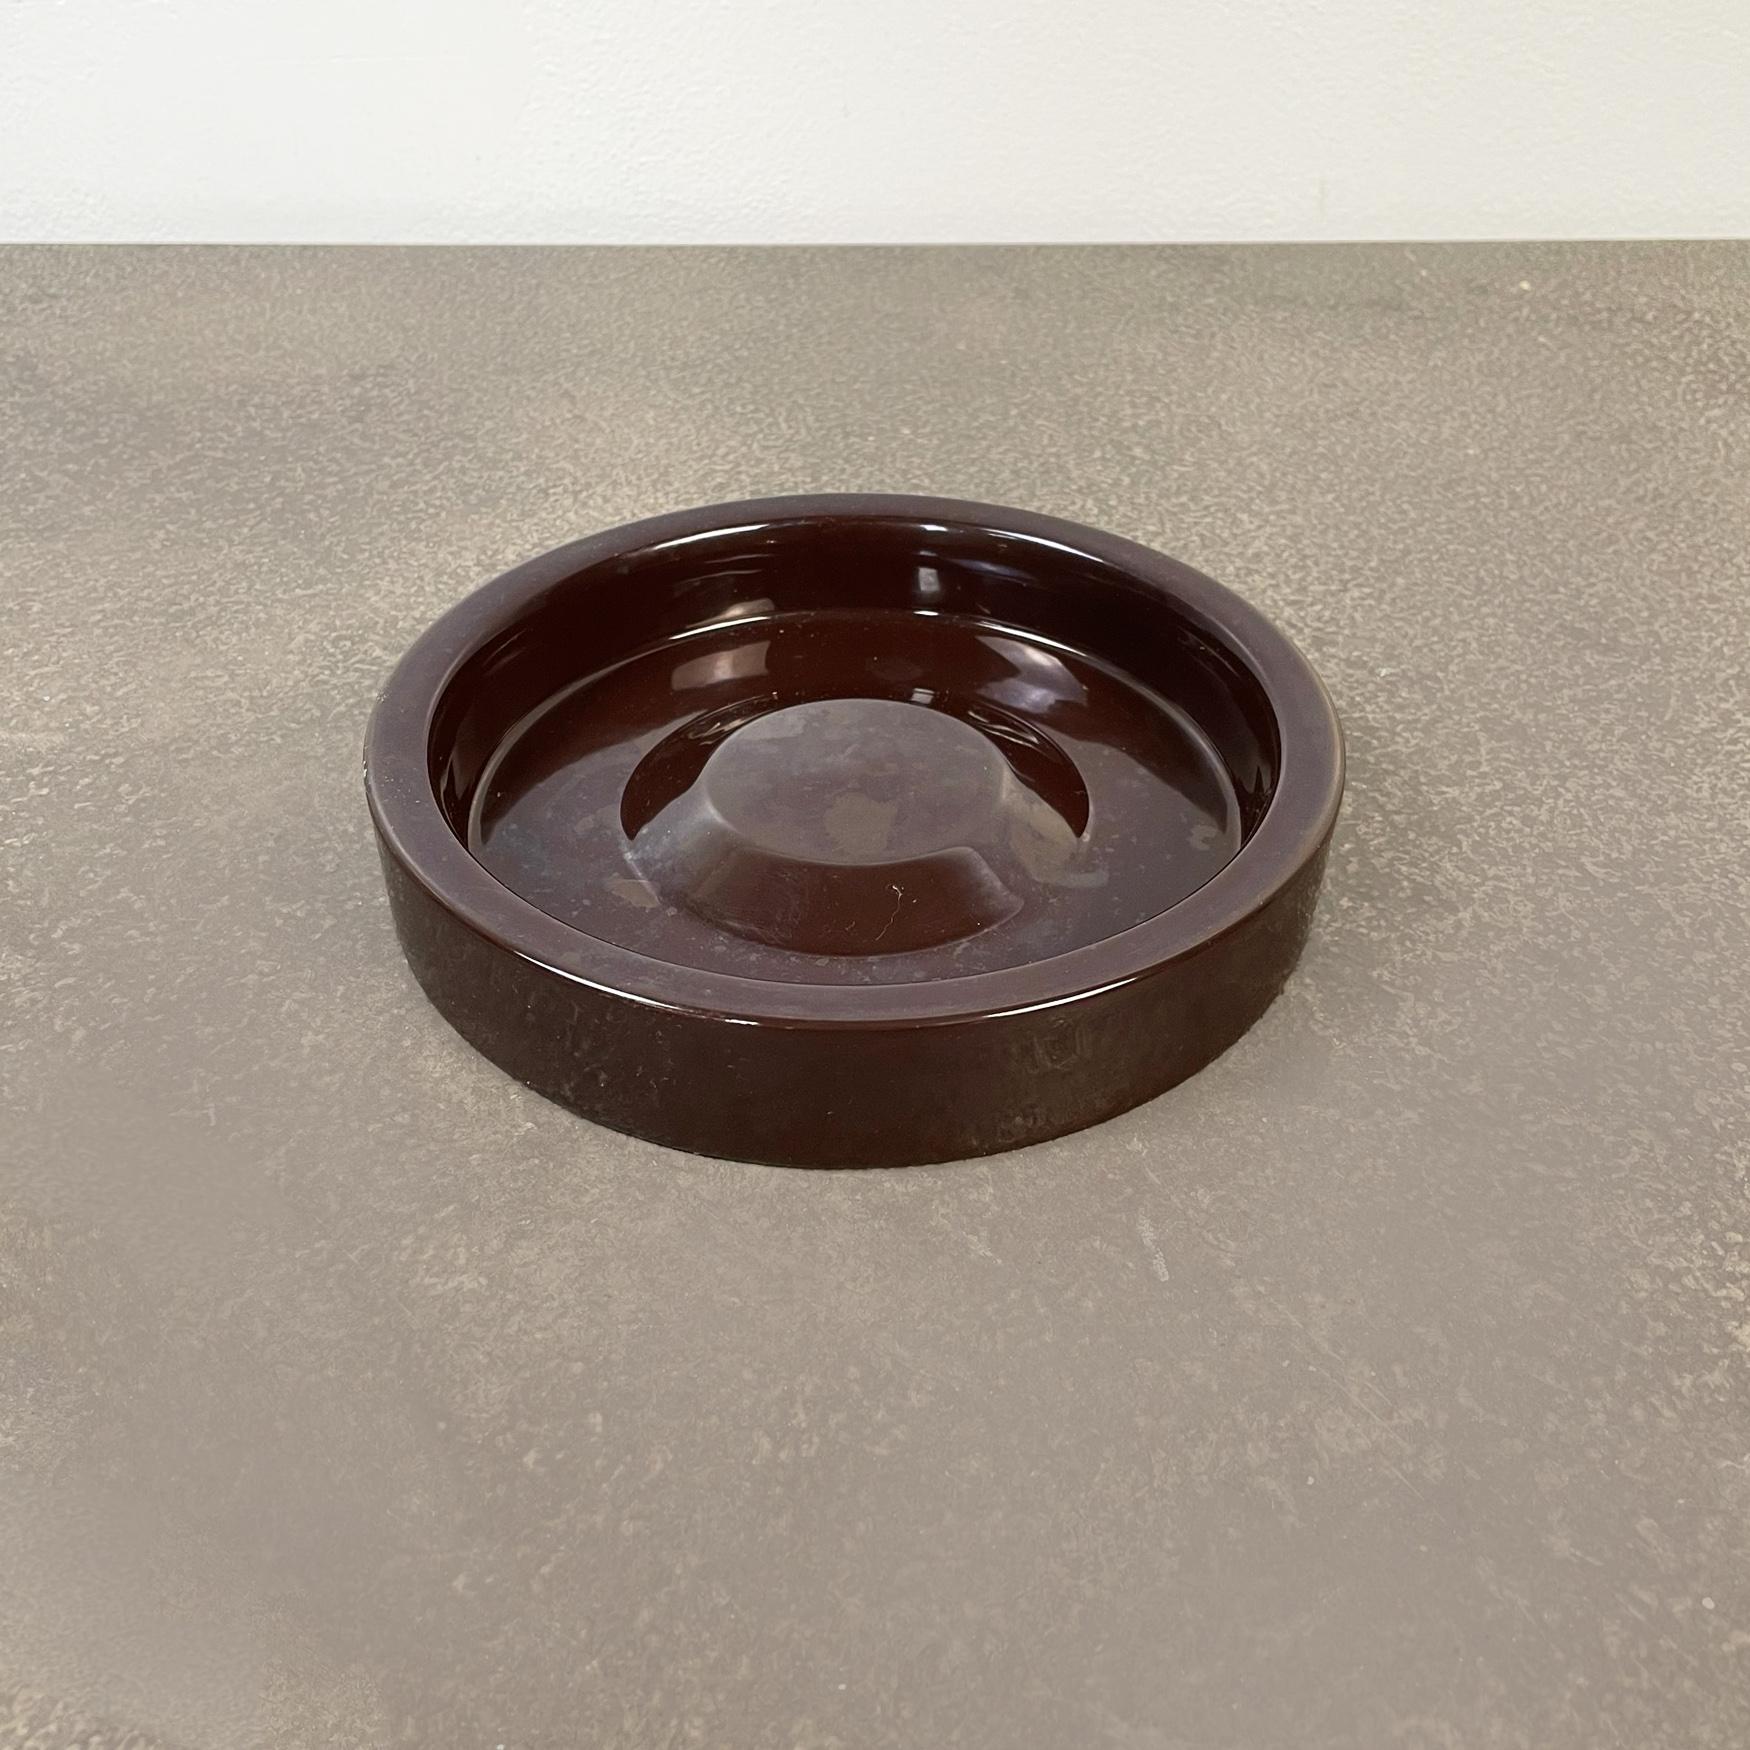 Italian mid-century brown porcelain stoneware ashtray by Mangiarotti for Danese, 1970s
Round ashtray in brown porcelain stoneware.
Produced by Danese in 1970s and designed by Angelo Mangiarotti. Logo on the back.
Good conditions.
Measurements in